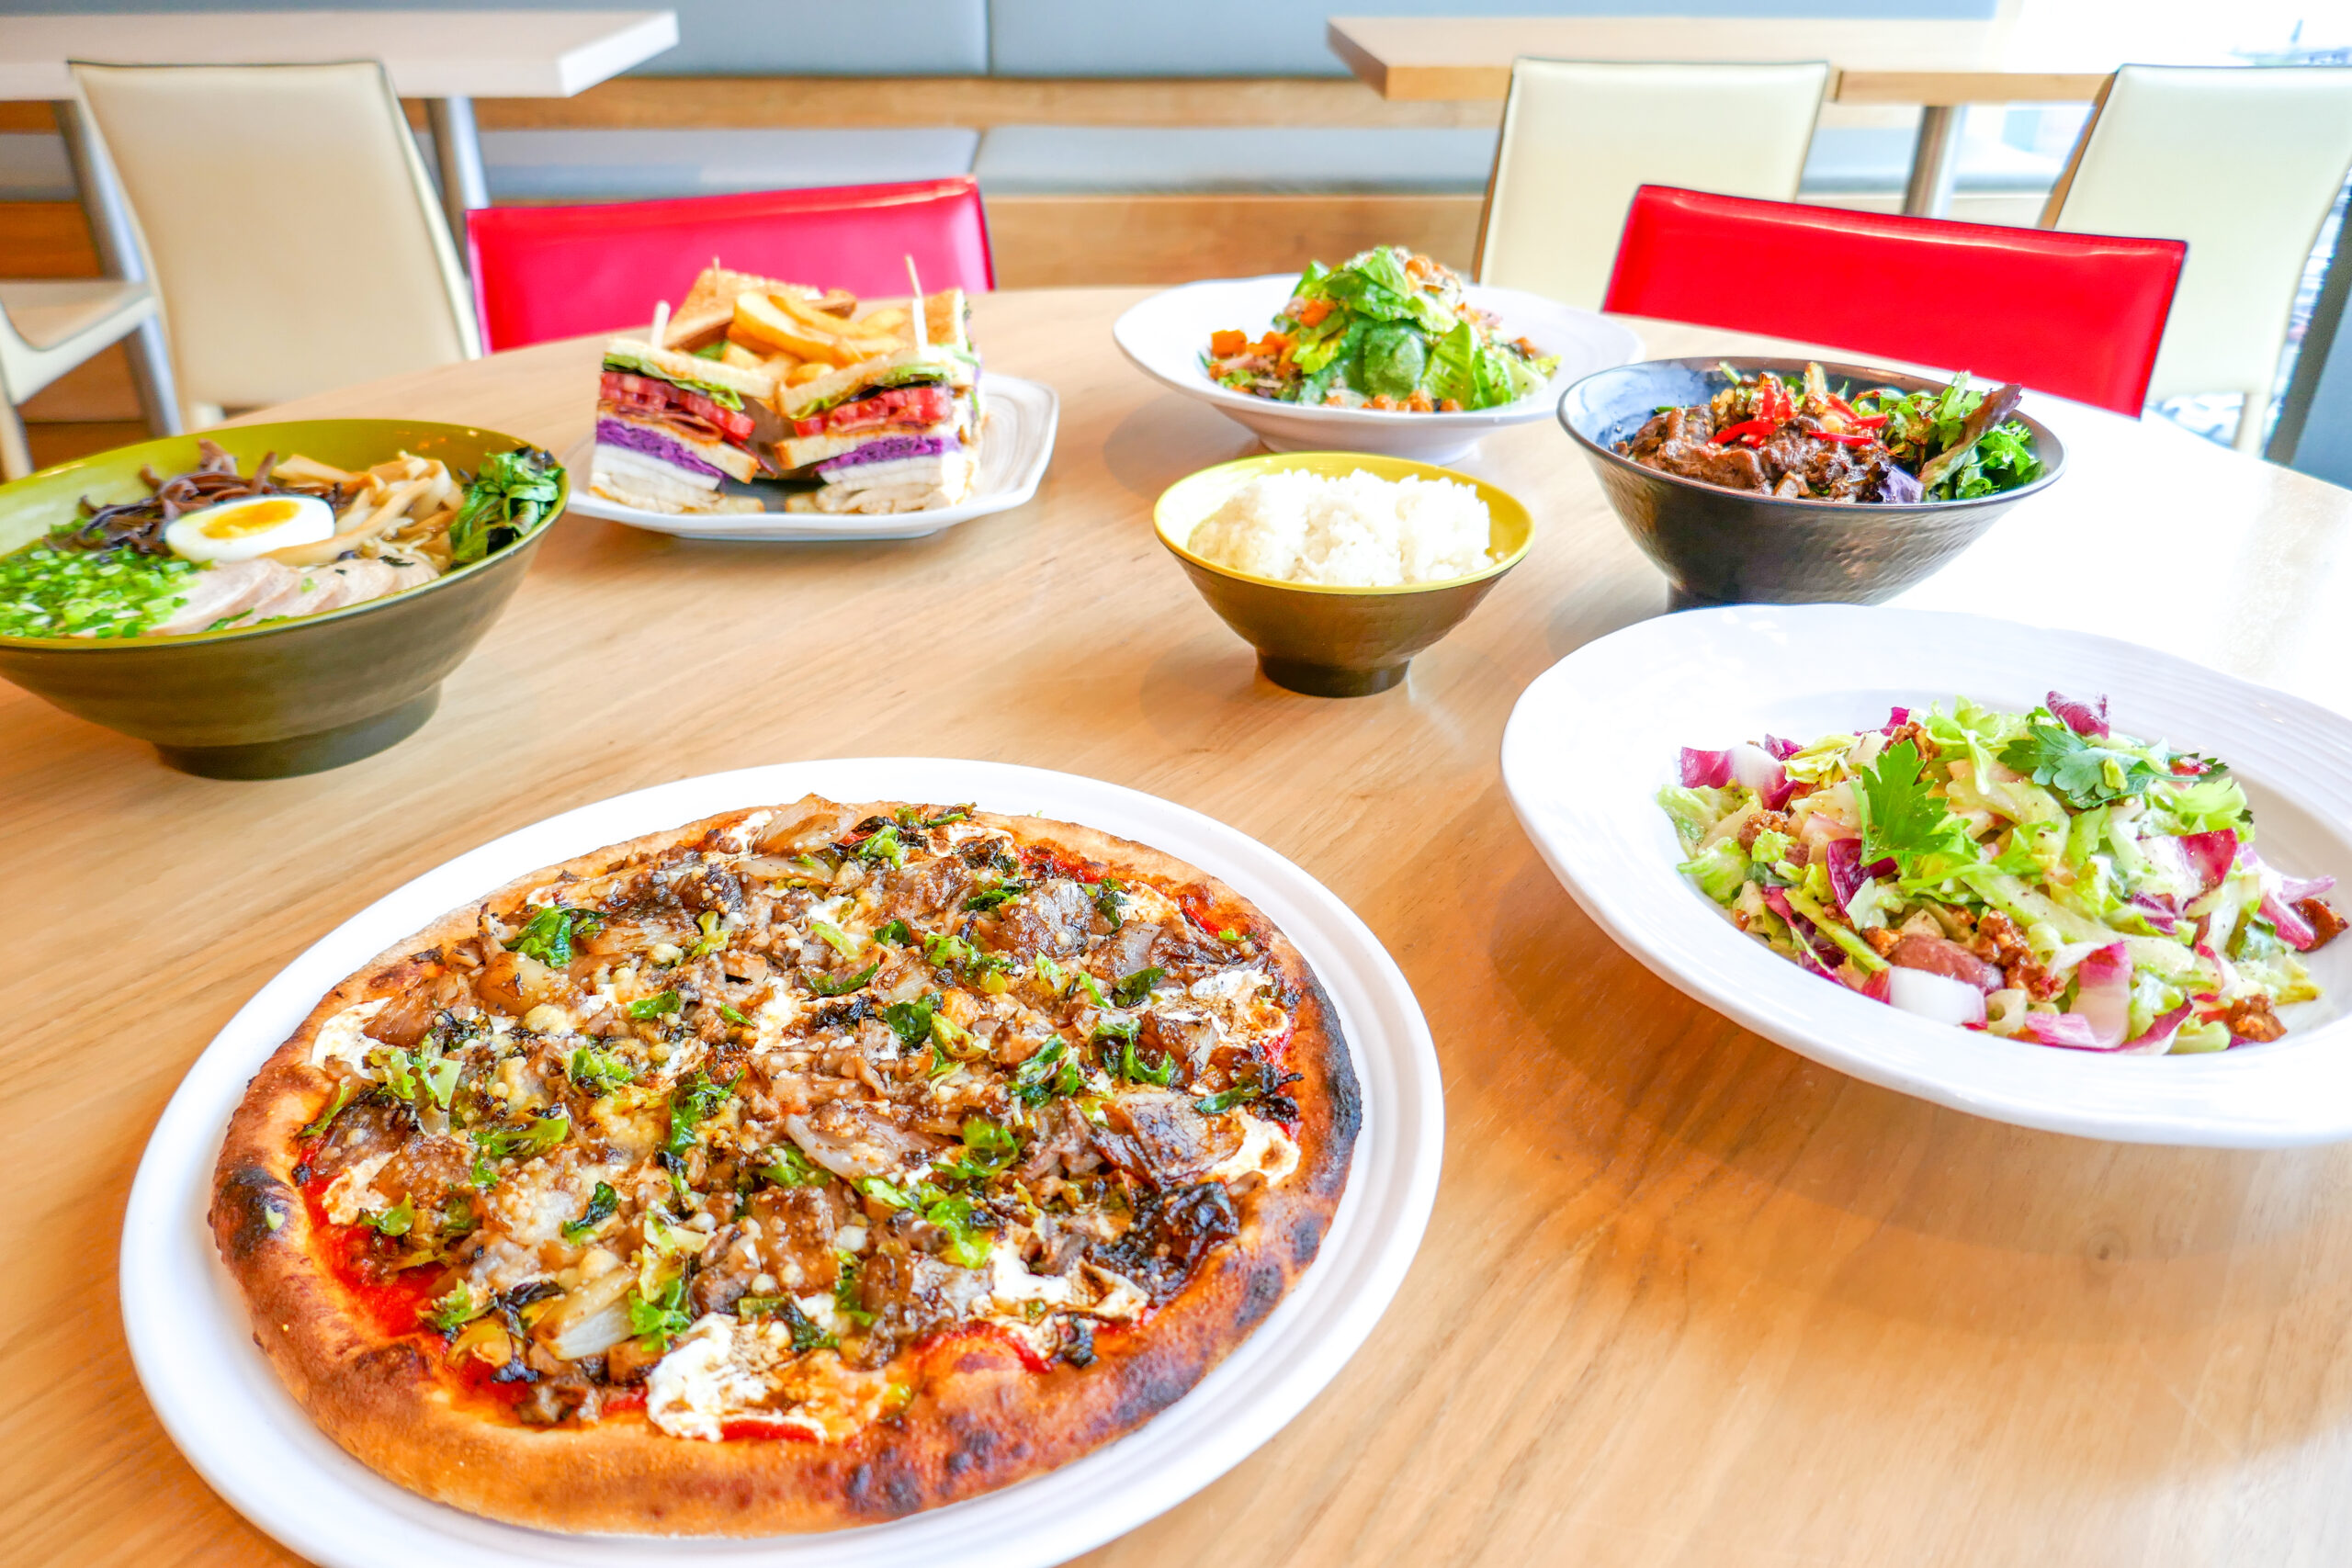 Close up of the Sausage Pizza and Autumn Chopped Salad with other food dishes in the background